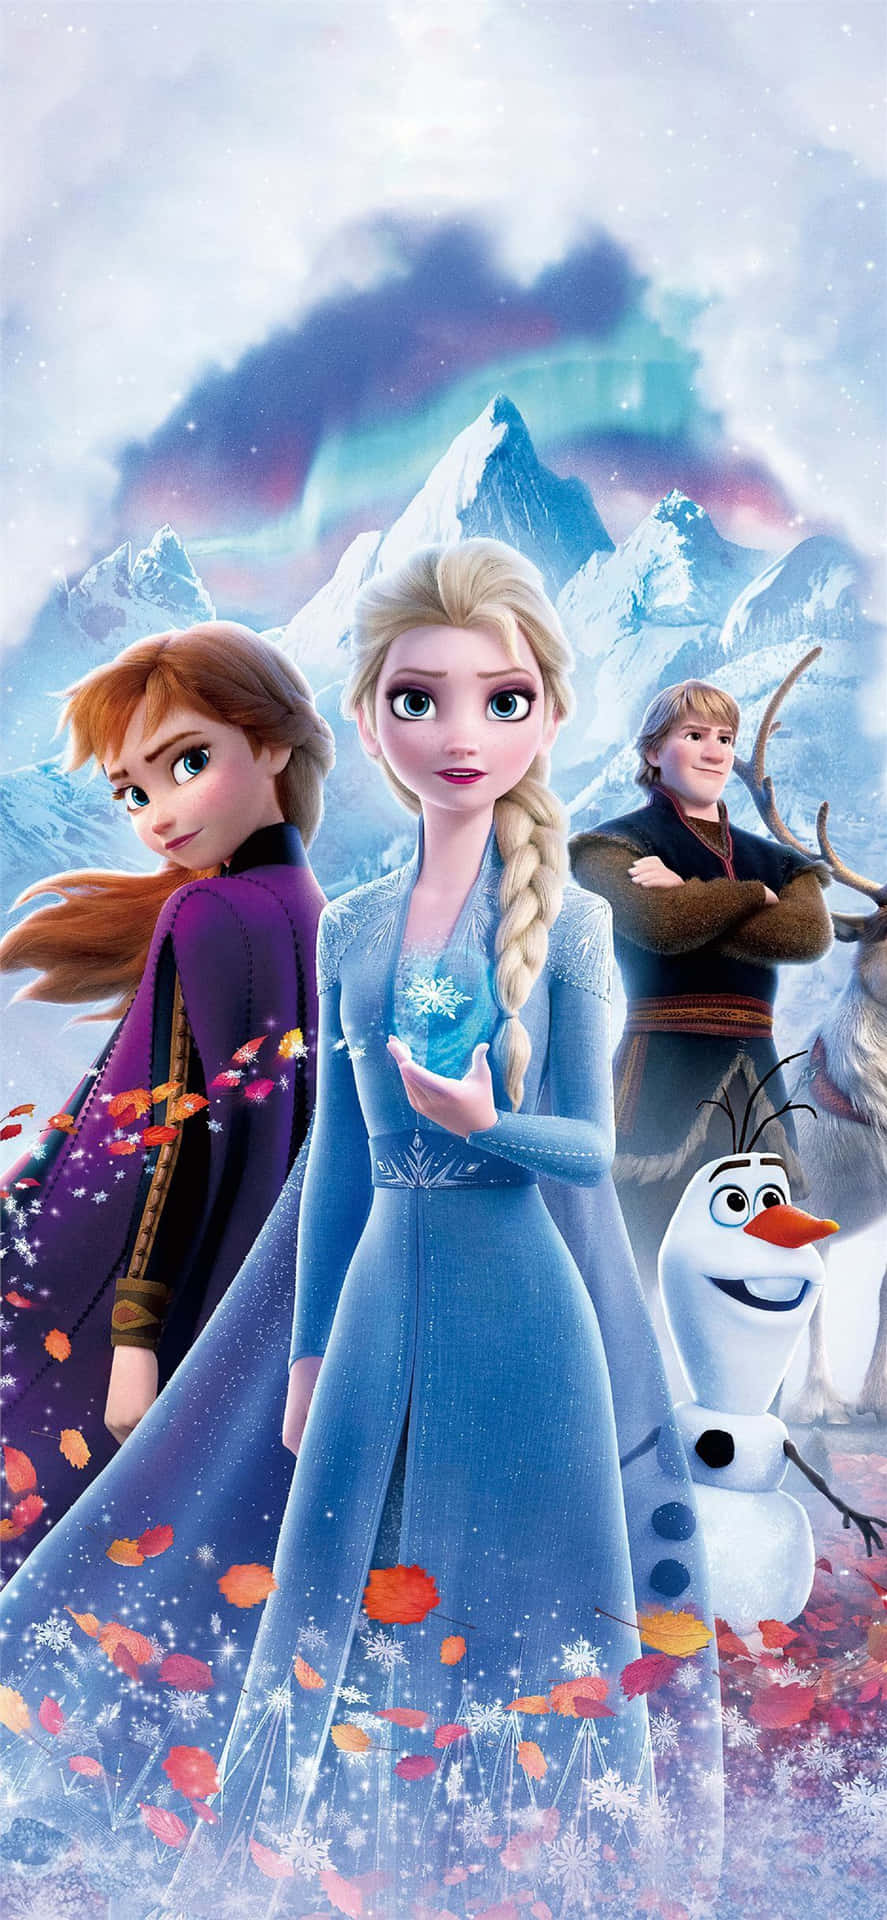 Frozen 2 Movie Poster With Two Characters Wallpaper